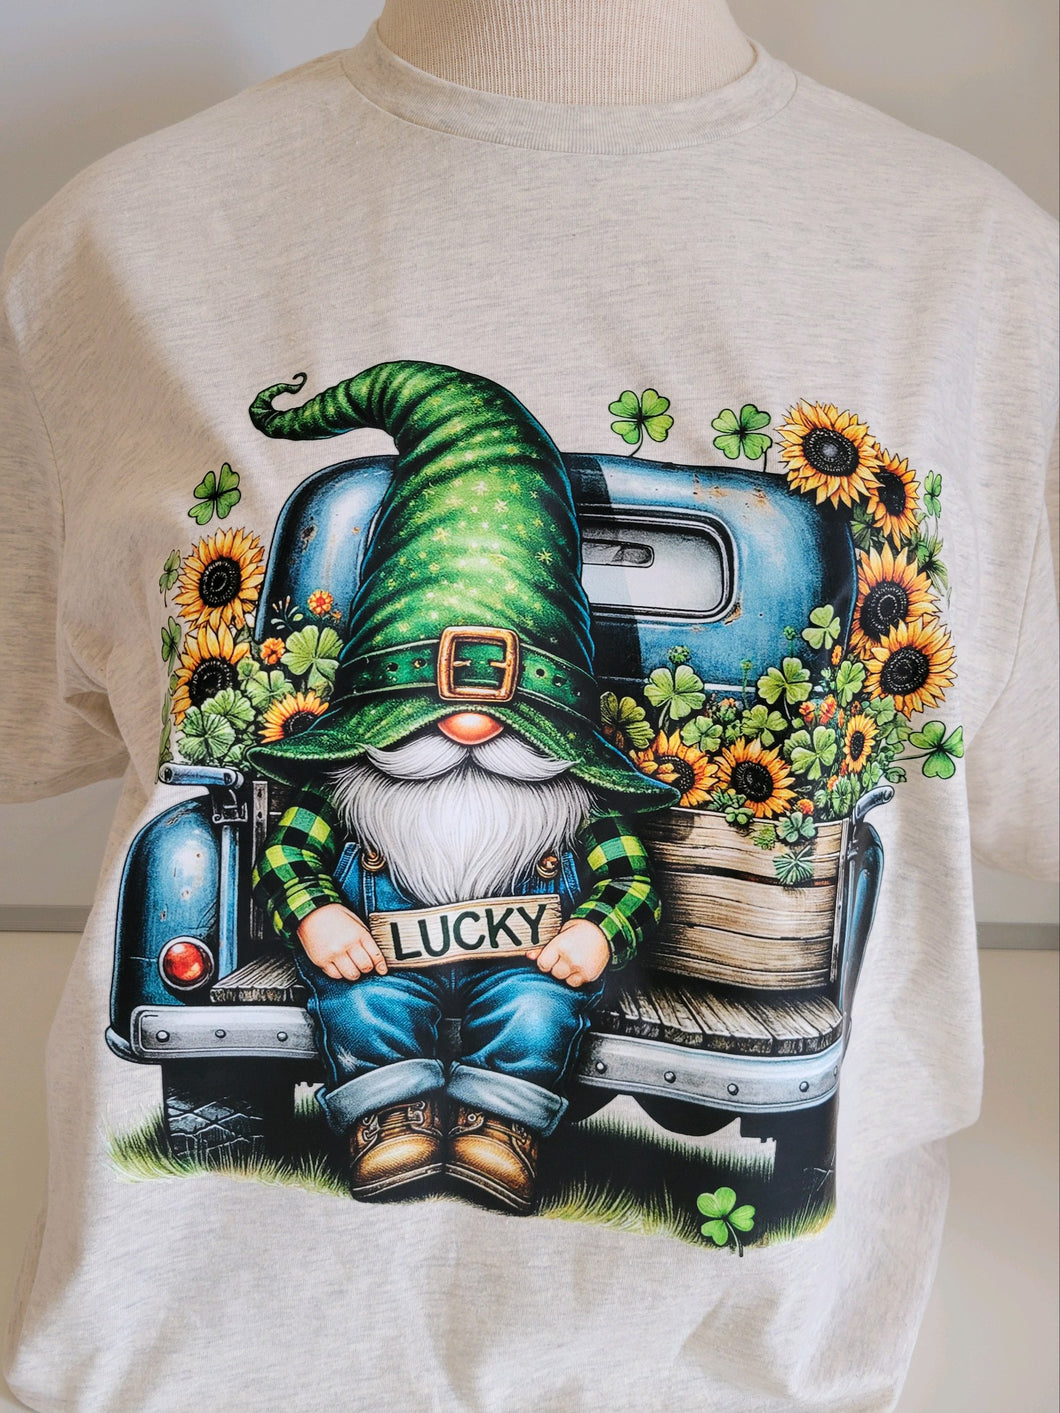 T-Shirt  St Patrick's Day GNOME LUCKY BACK OF VINTAGE TRUCK tee tshirt 2XLARGE